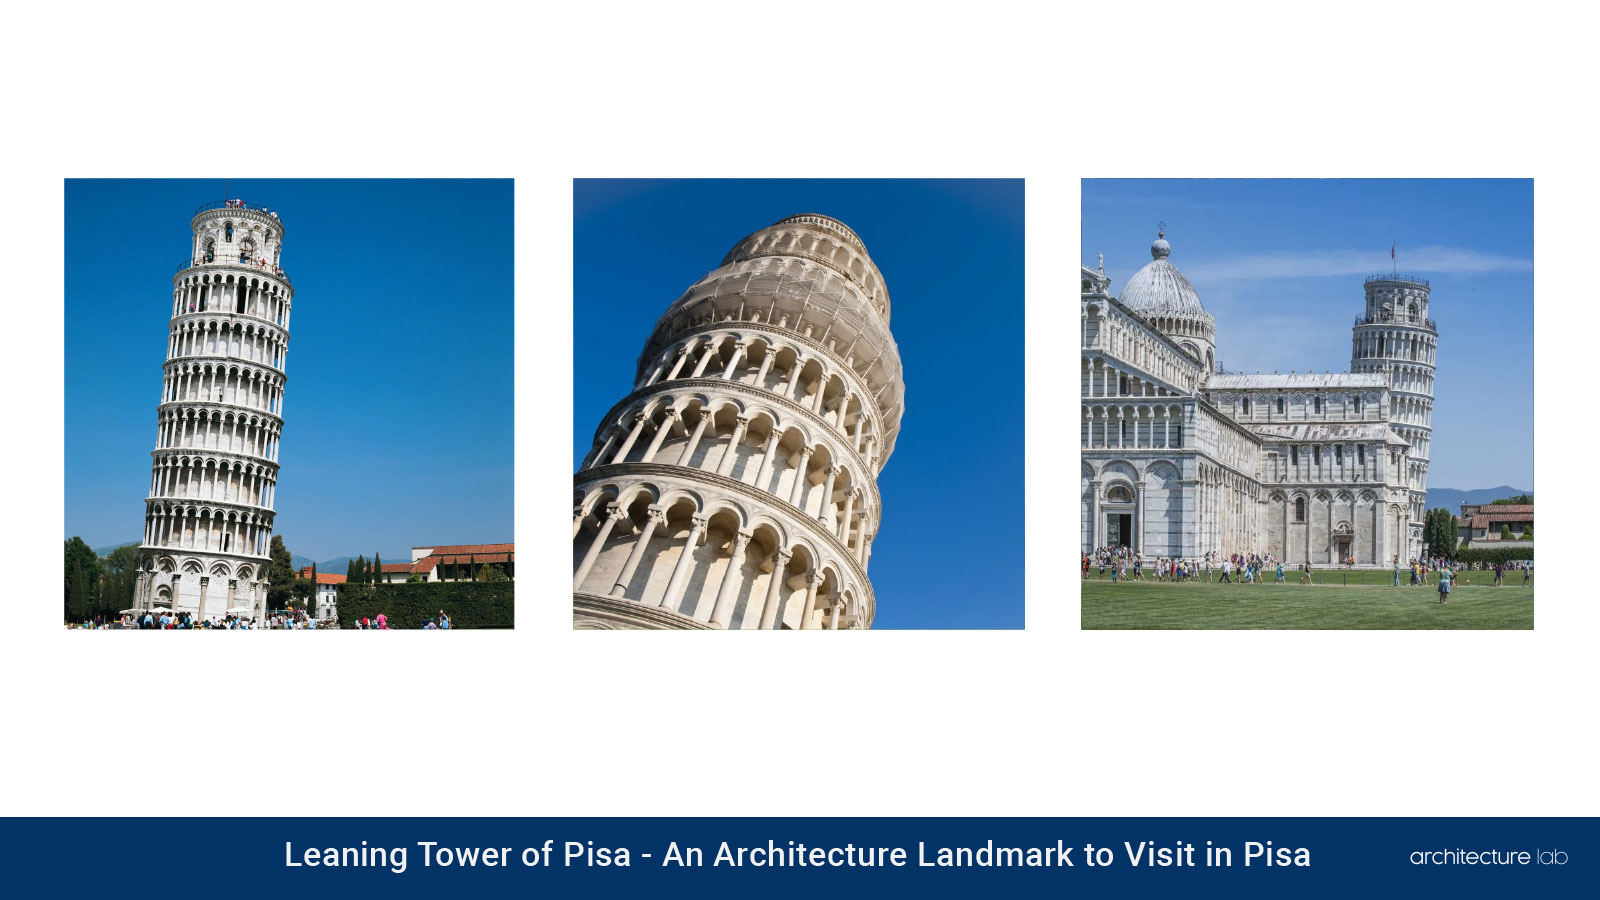 Leaning tower of pisa: an architecture landmark to visit in pisa